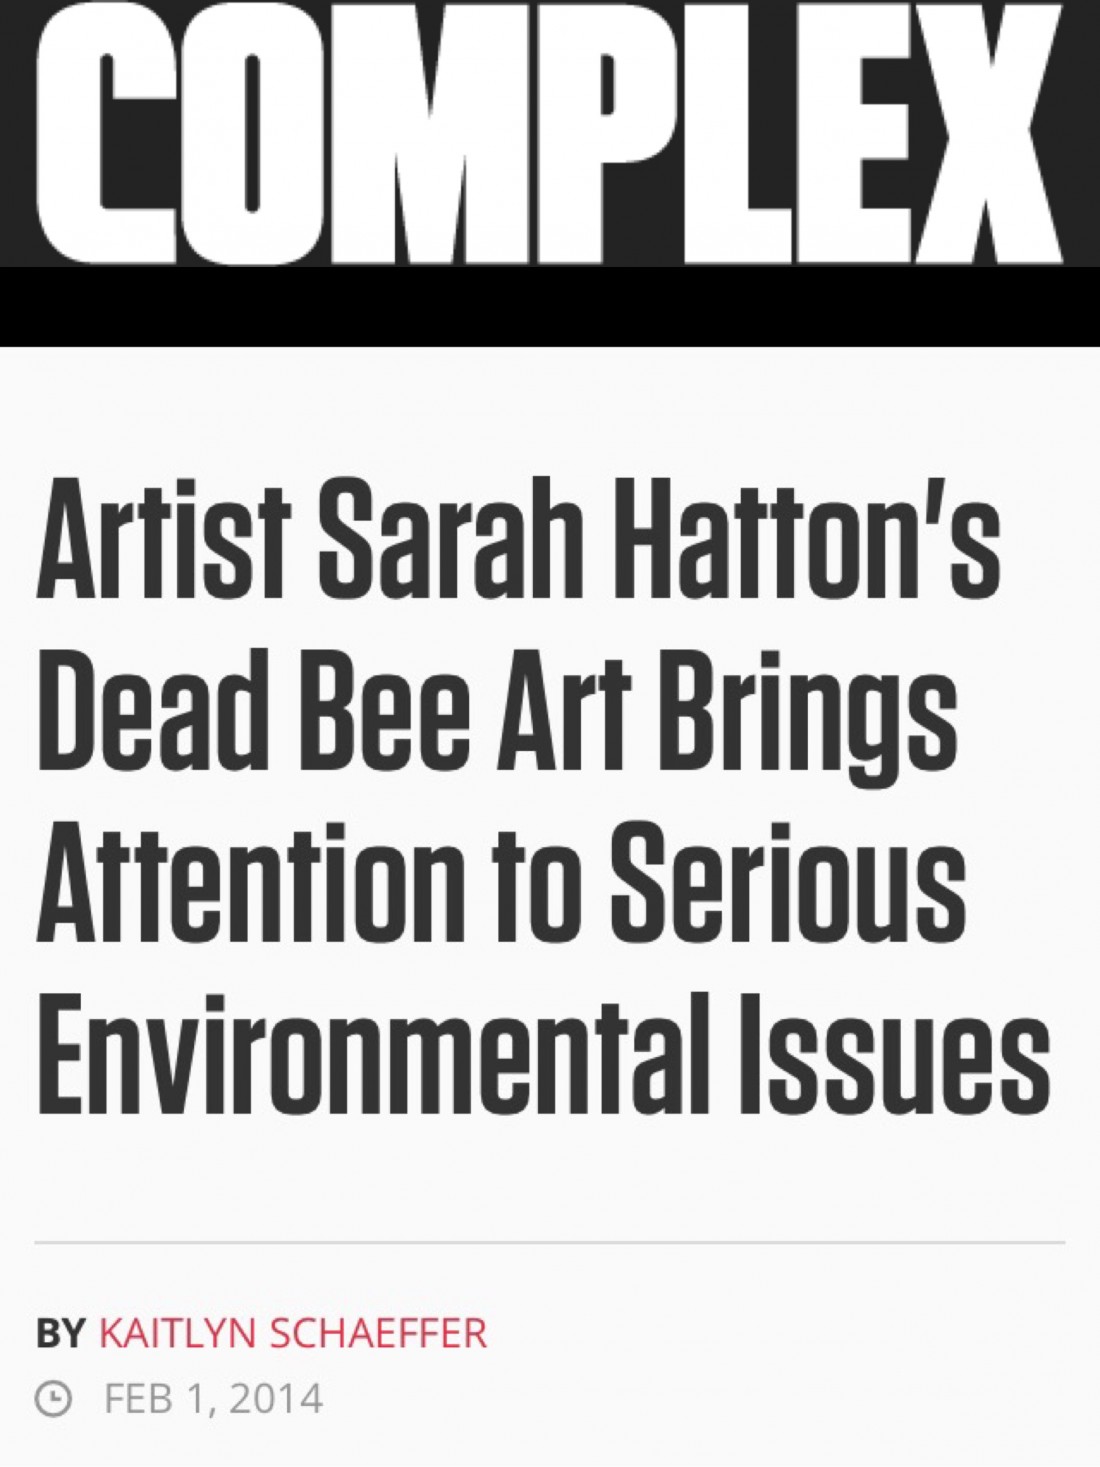 2014/02/01 "Artist Sarah Hatton's Dead Bee Art Brings Attention to Serious Environmental Issues".